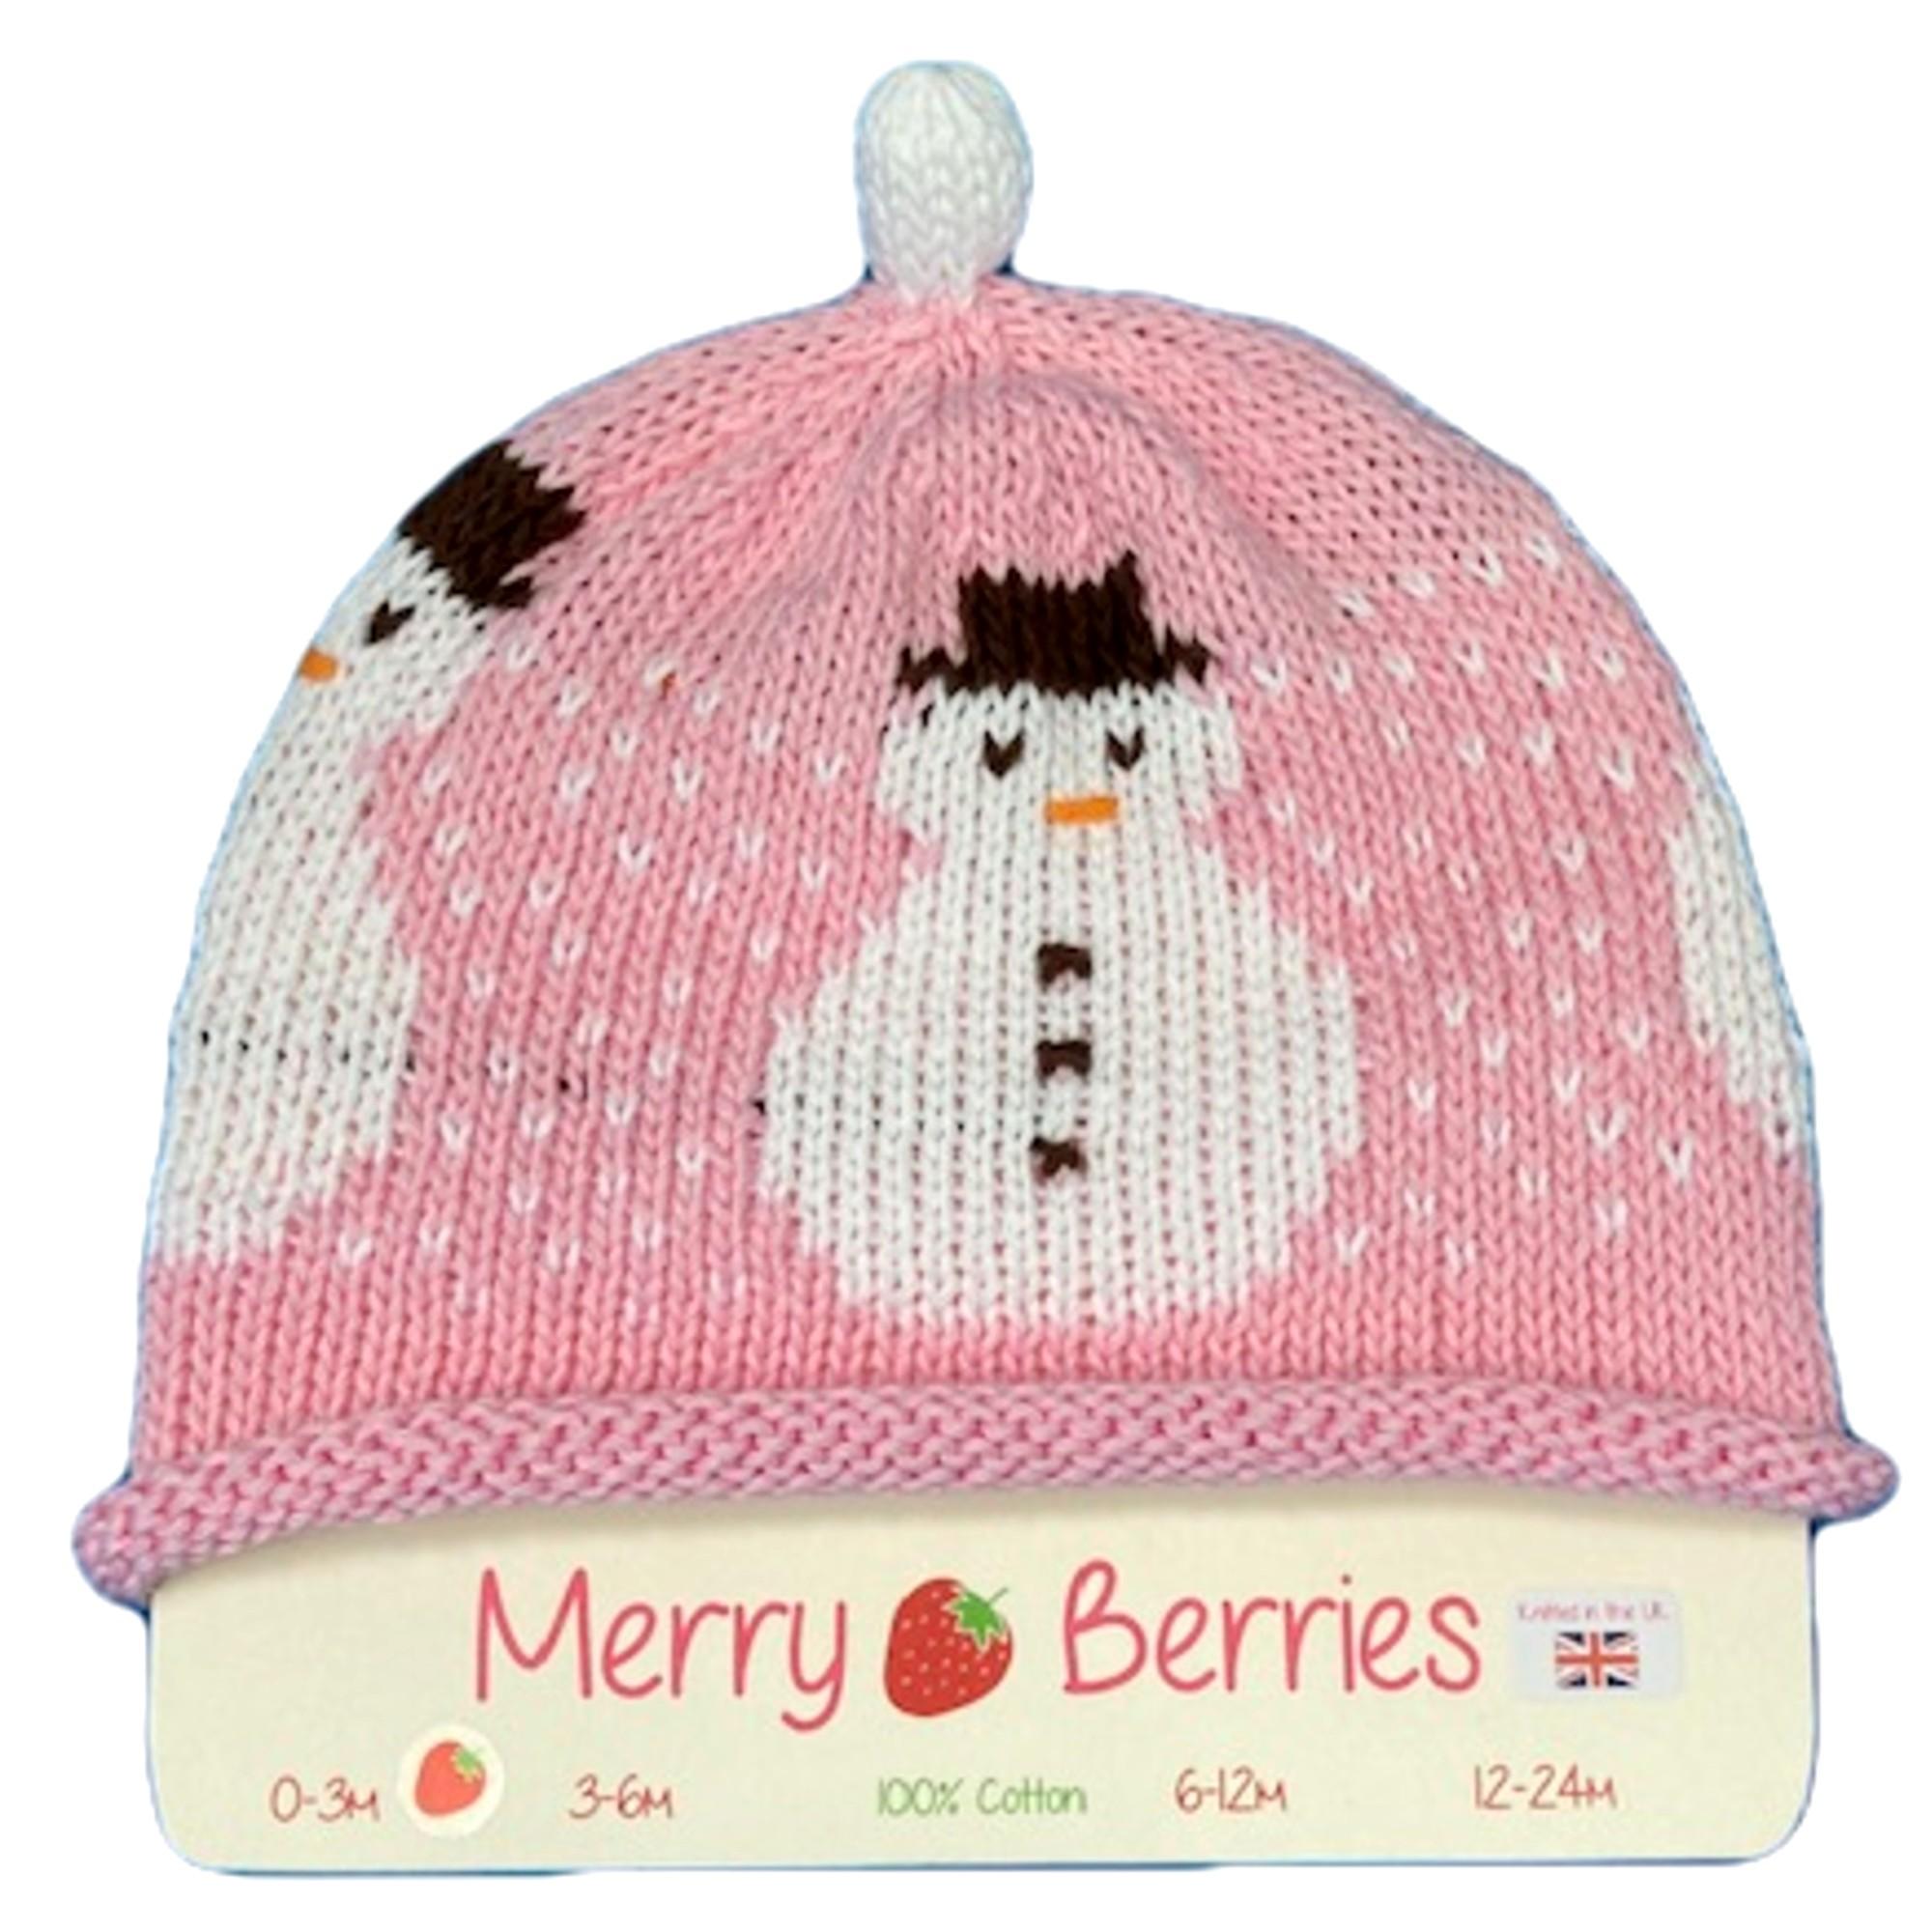 Merry Berries- Pink white Snowman Knitted Baby Hat- 0-24 Months- Cotton